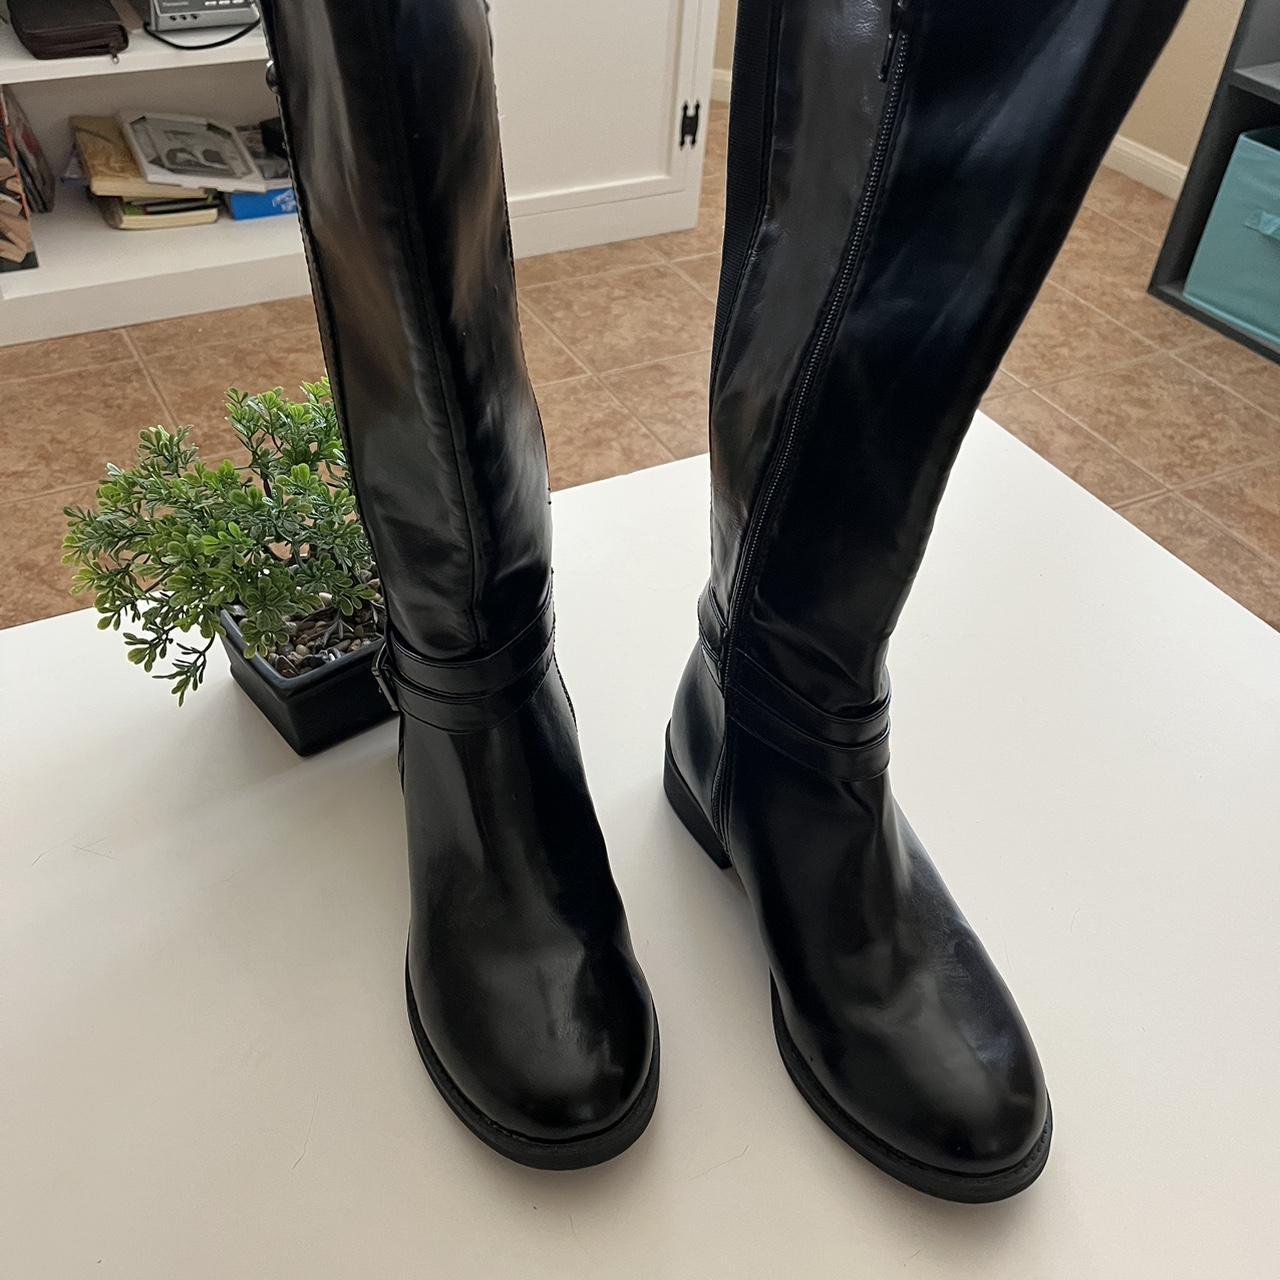 Knee High Black boots, has elastic at the top for... - Depop